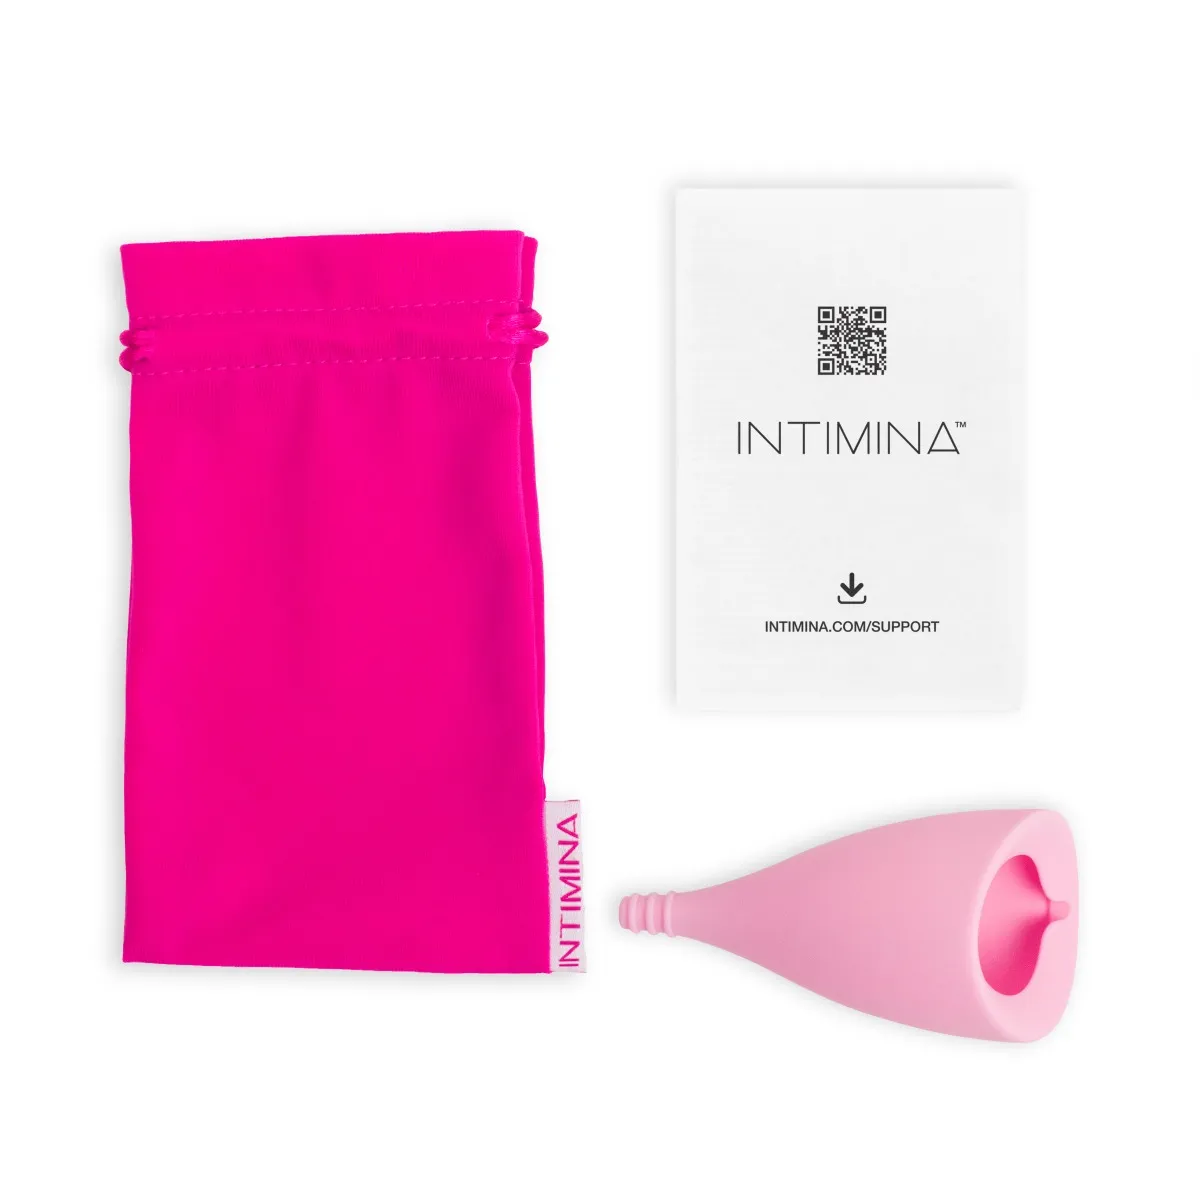 Intimina Lily Cup Size A Coppetta mestruale in silicone